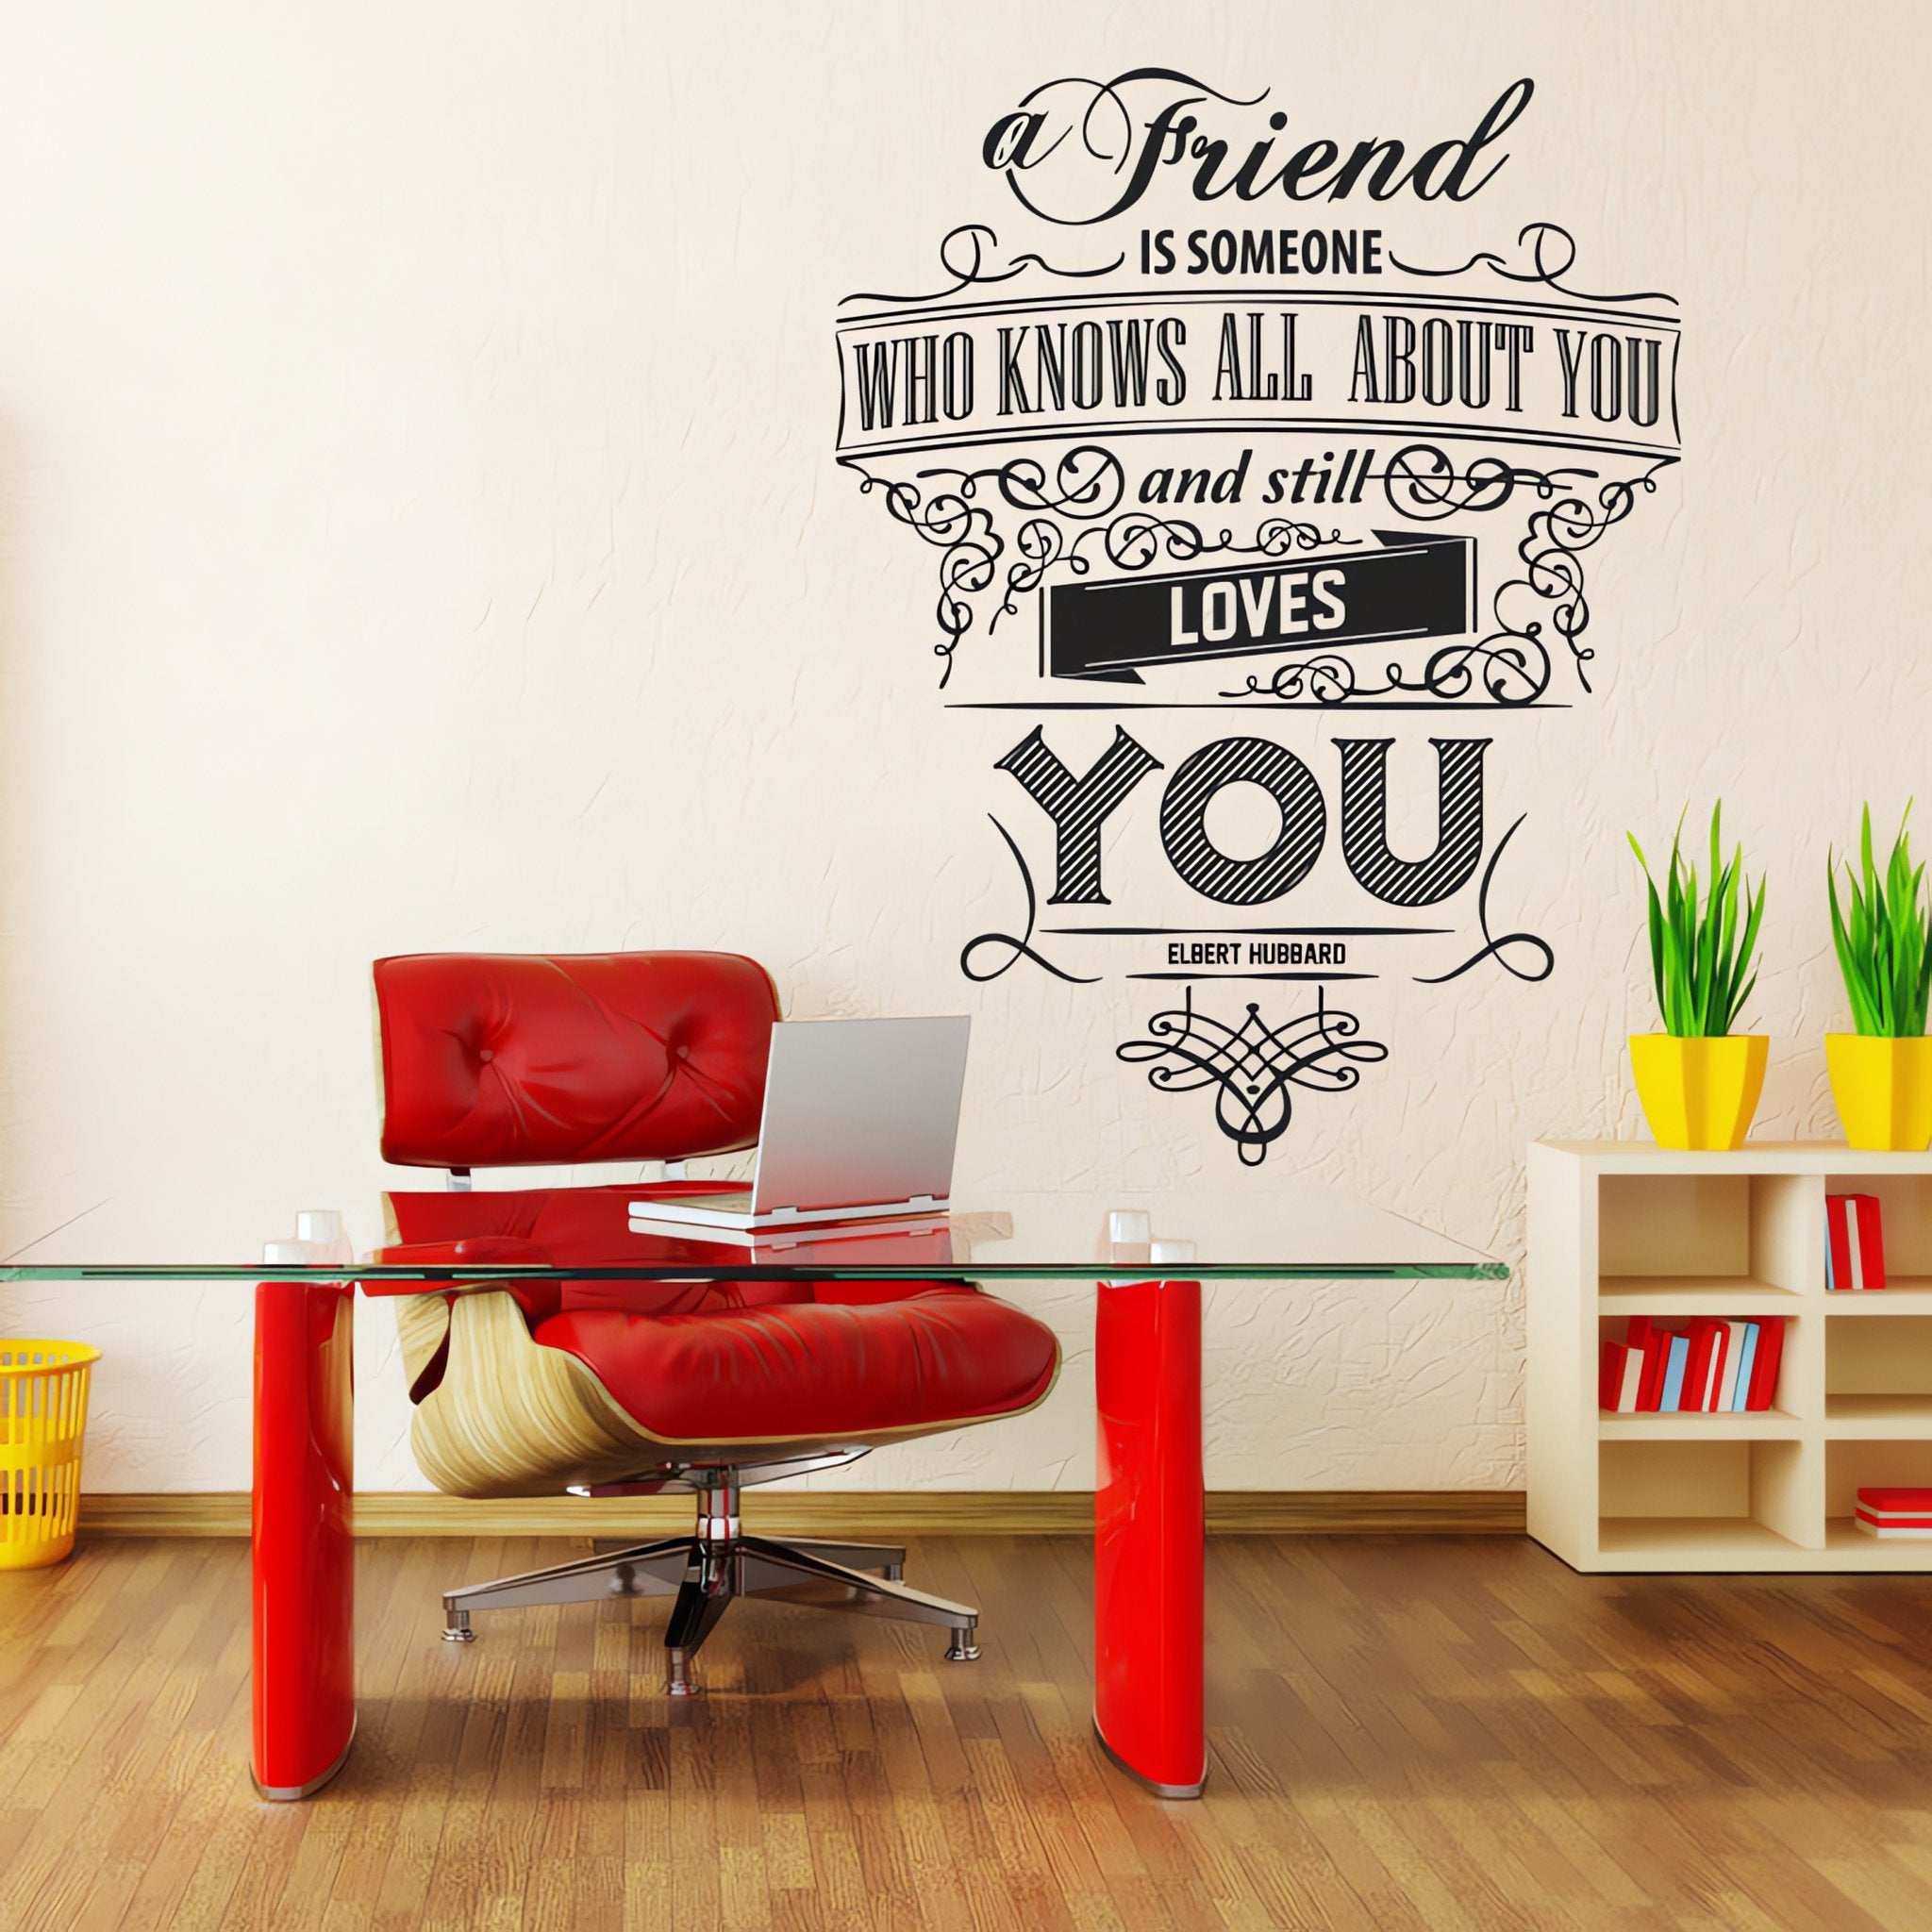 Wall quote sticker with text "A Friend Is Someone Who Knows All About You And Still Loves You" in an office with a desk, chair, office equipment and shelf.